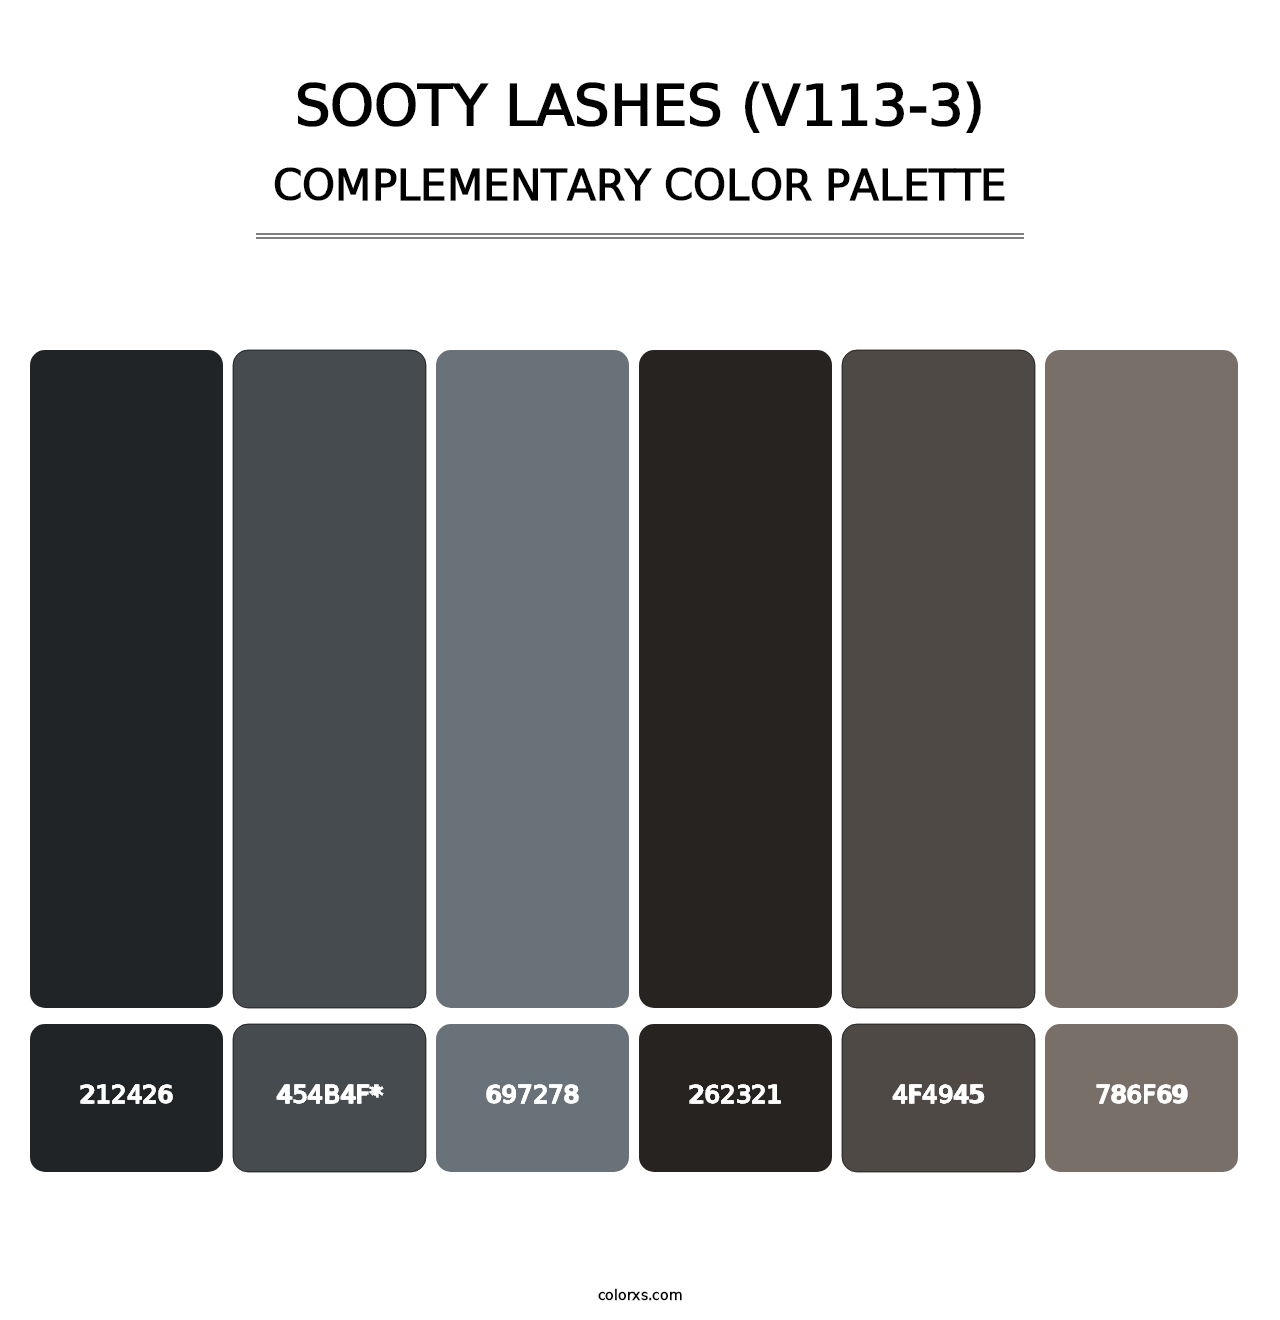 Sooty Lashes (V113-3) - Complementary Color Palette